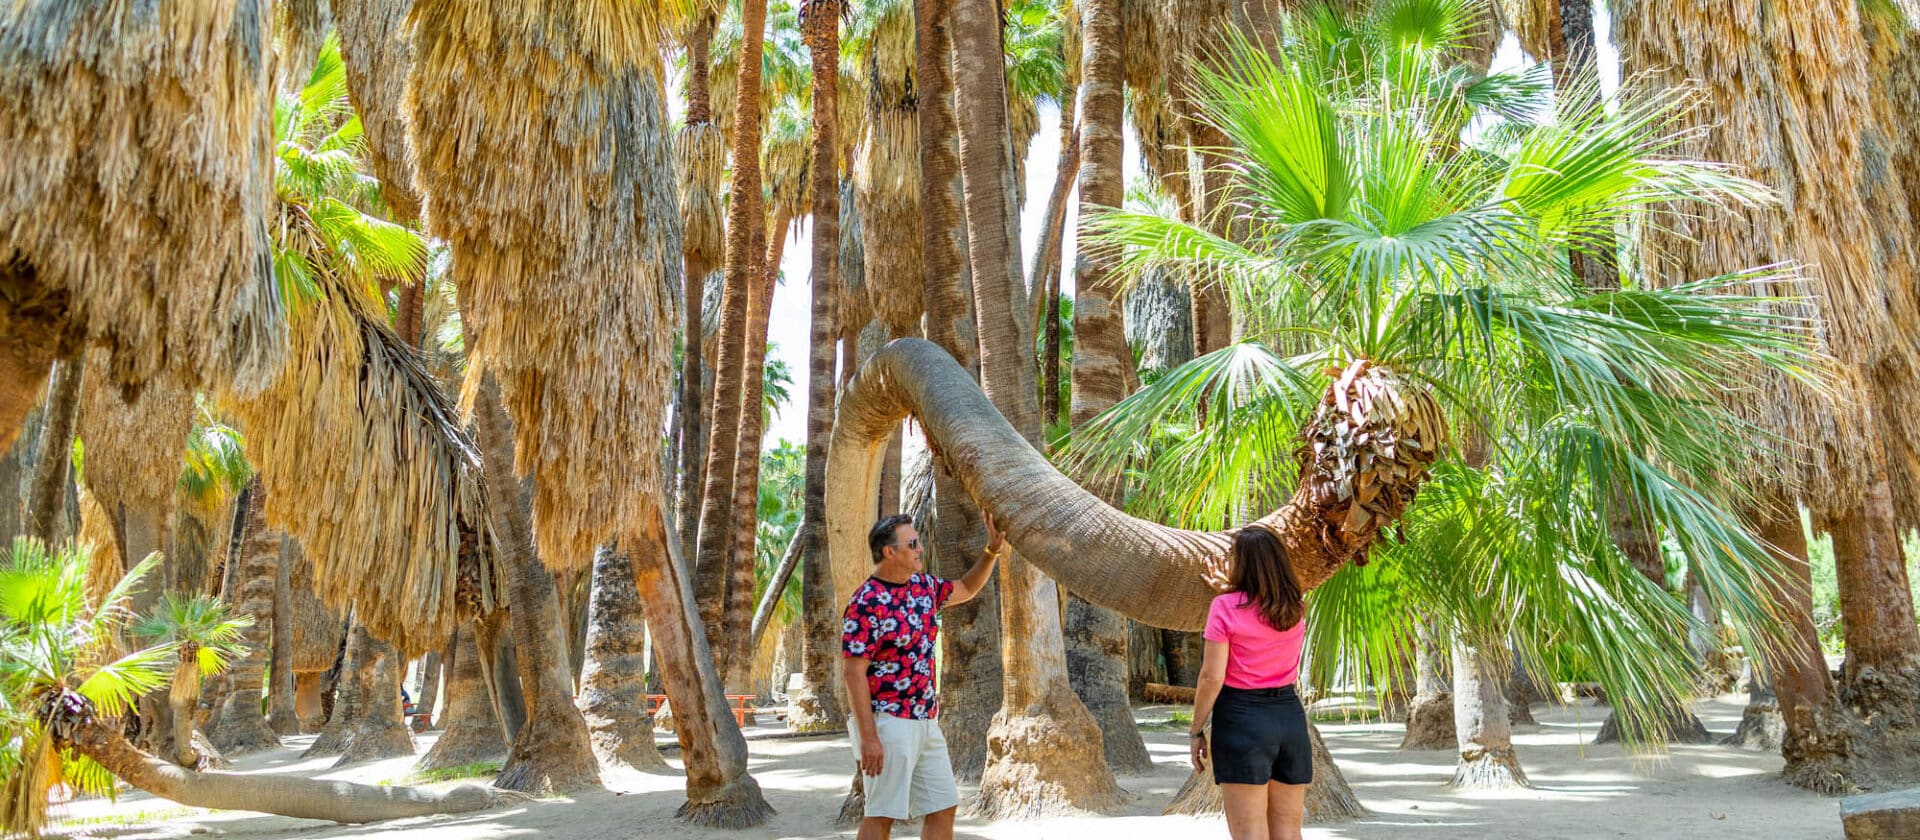 Two people standing under unusually shaped palm trees in a tropical setting, one person touching a bent palm trunk while looking upwards.